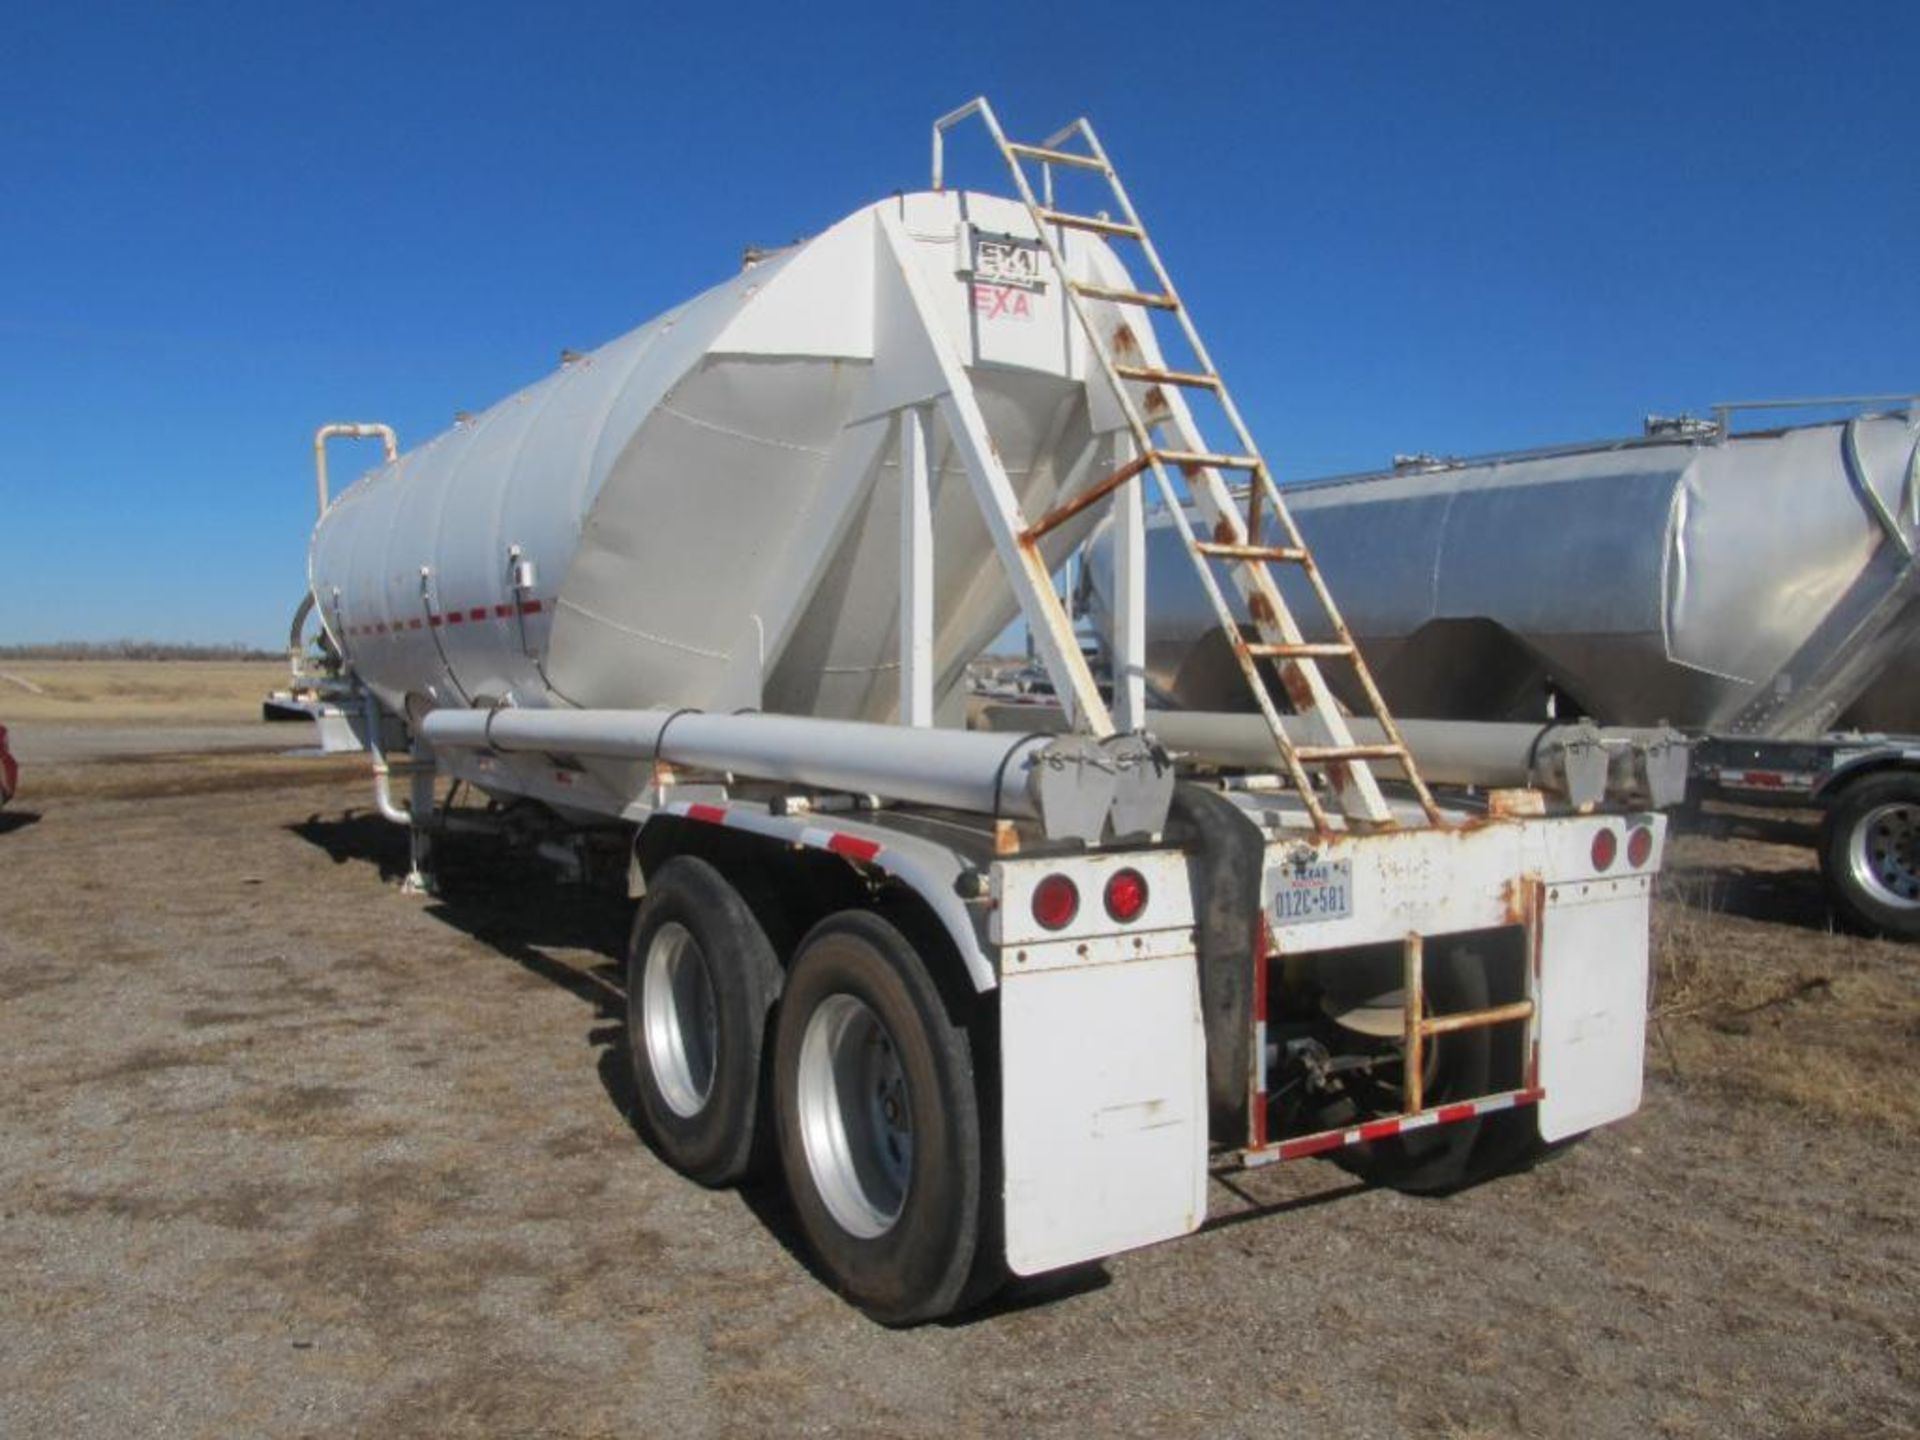 2011 EXA t/a Pneumatic Steel Trailer,s/n 3e9j142h3bt034175,a/r susp, capacity 1000 ft3 - Image 2 of 6